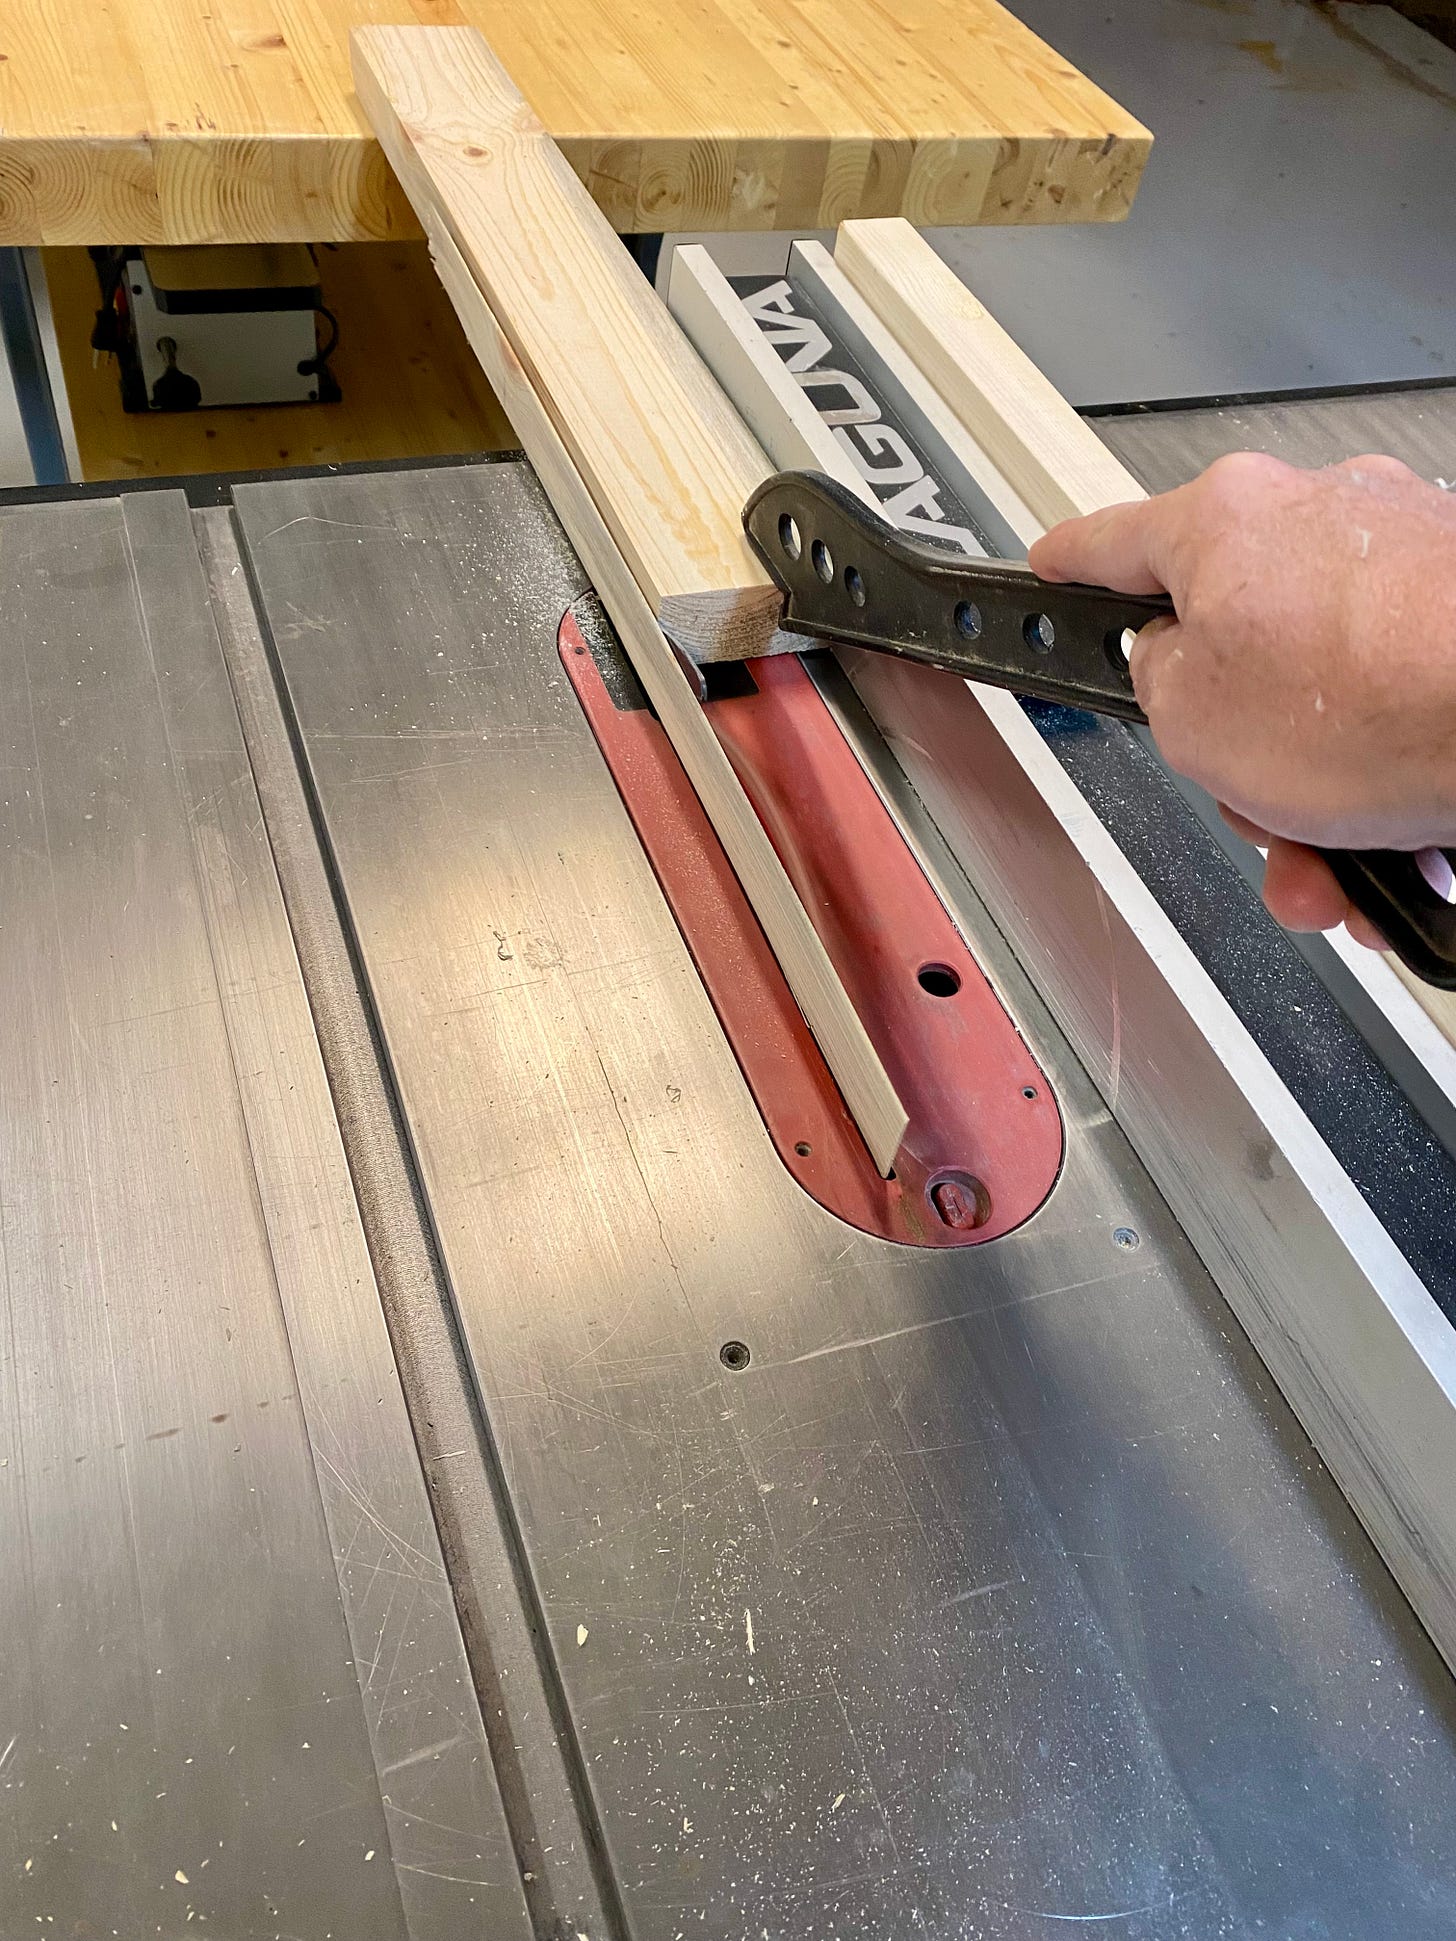 Ripping edges on a table saw